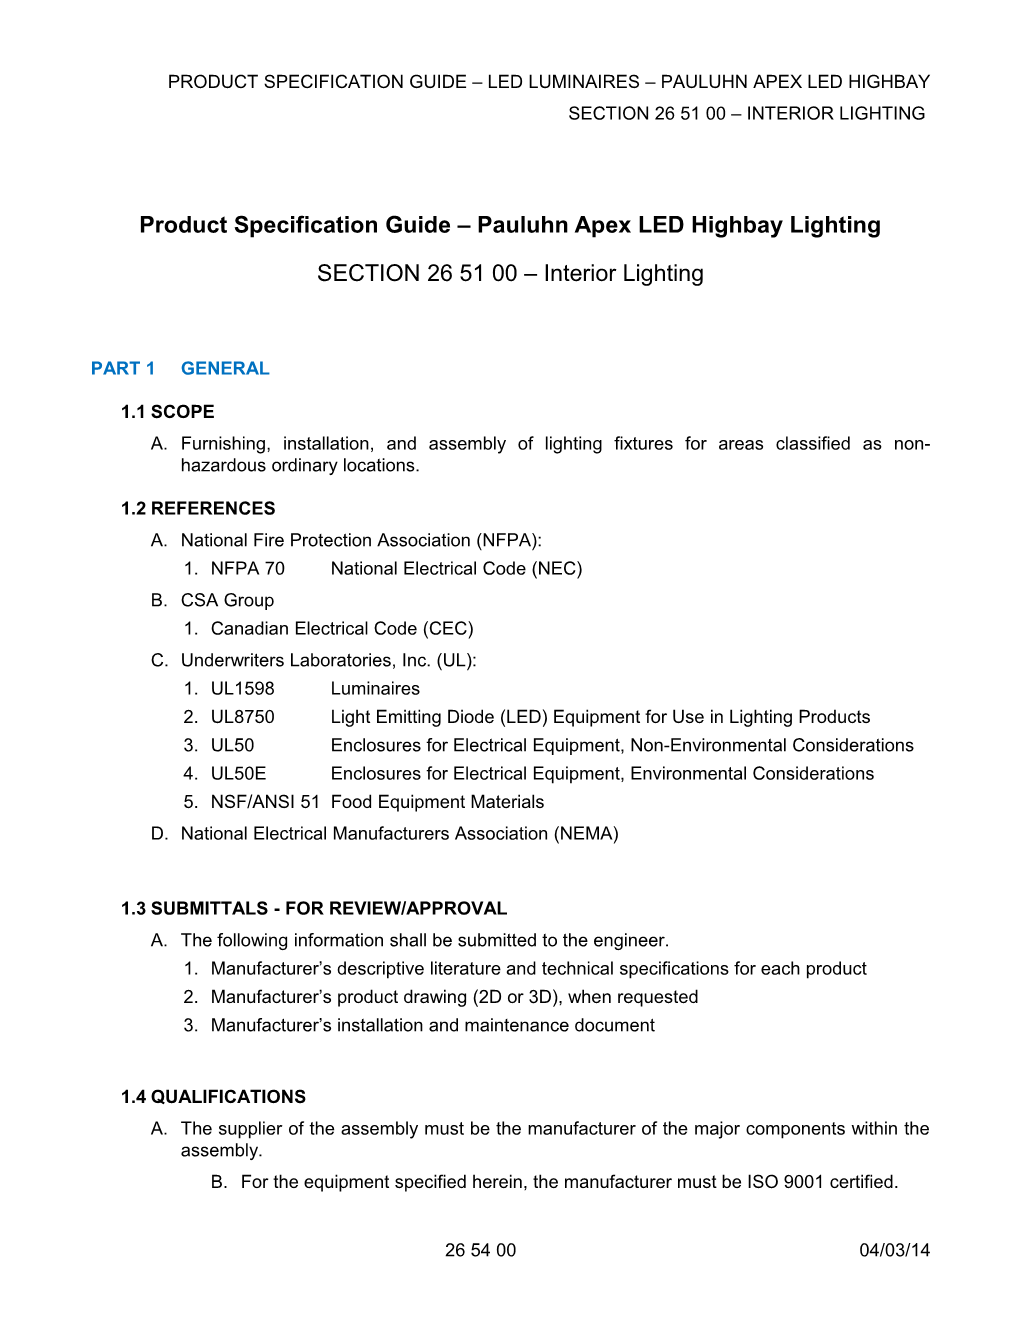 PRODUCT SPECIFICATION GUIDE LED Luminaires Pauluhn Apex Led Highbay